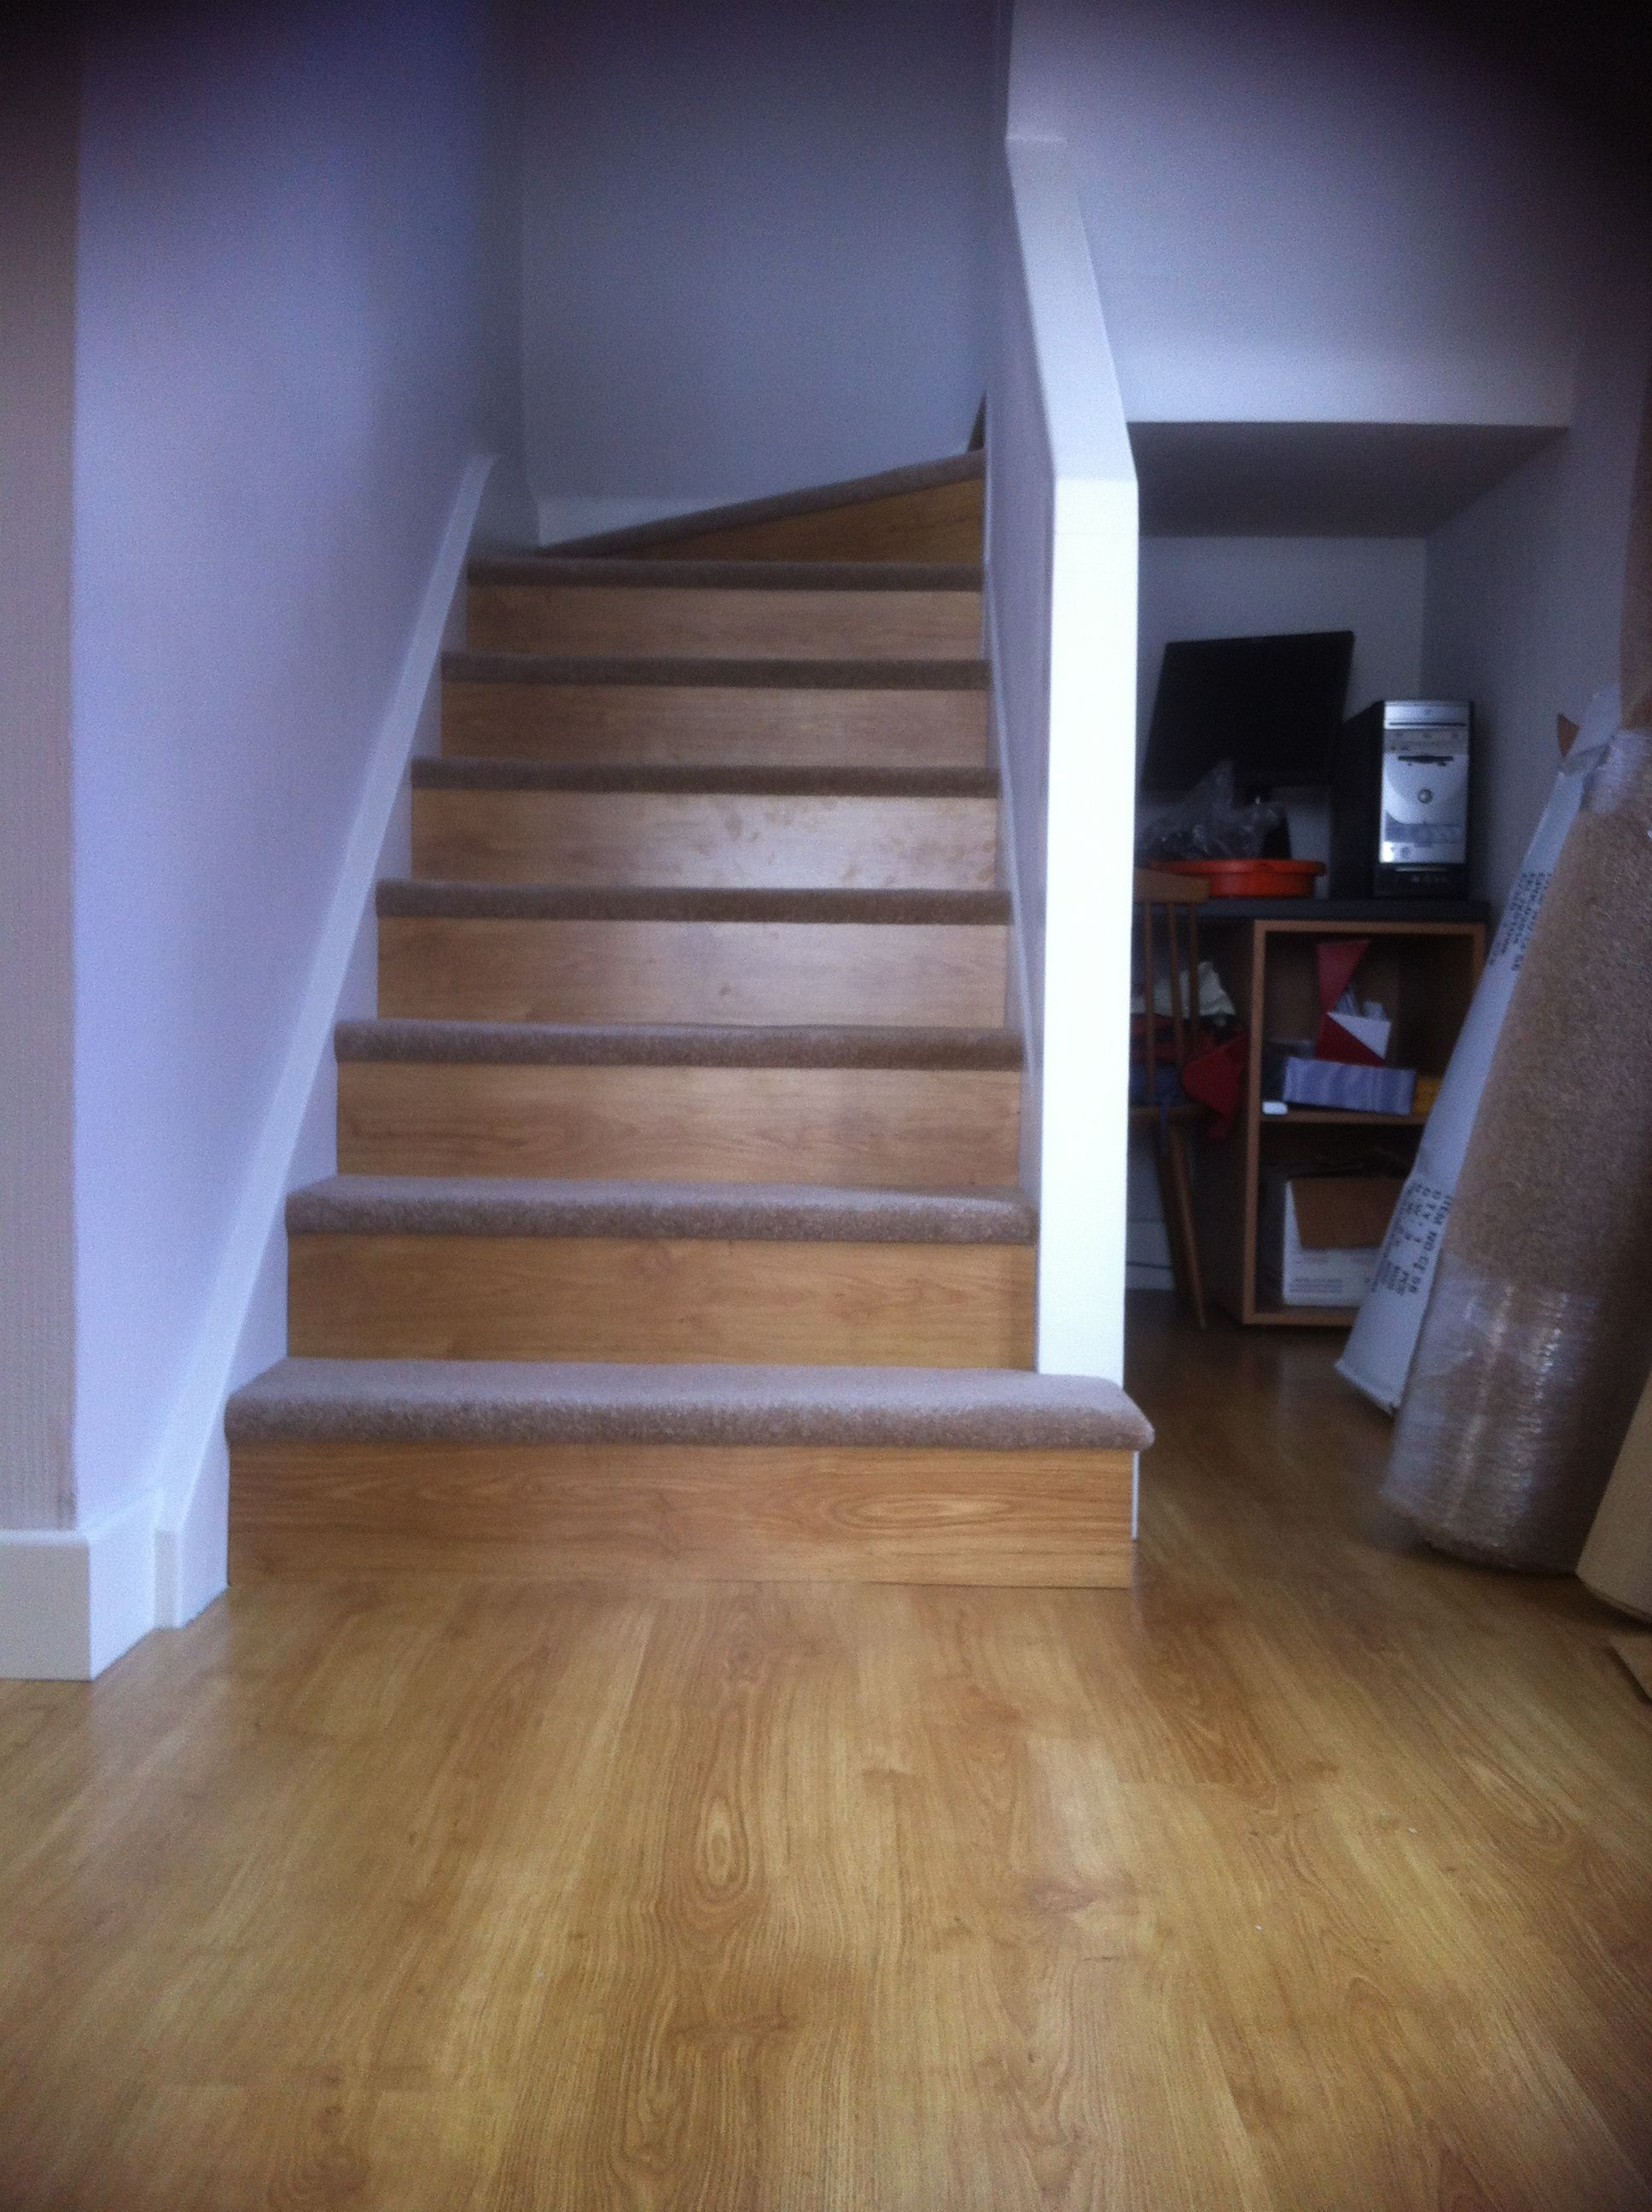 24 Wonderful Hardwood Flooring Sale In Mississauga 2023 free download hardwood flooring sale in mississauga of our diy staircase using leftover laminate flooring on the risers with regard to our diy staircase using leftover laminate flooring on the risers carp